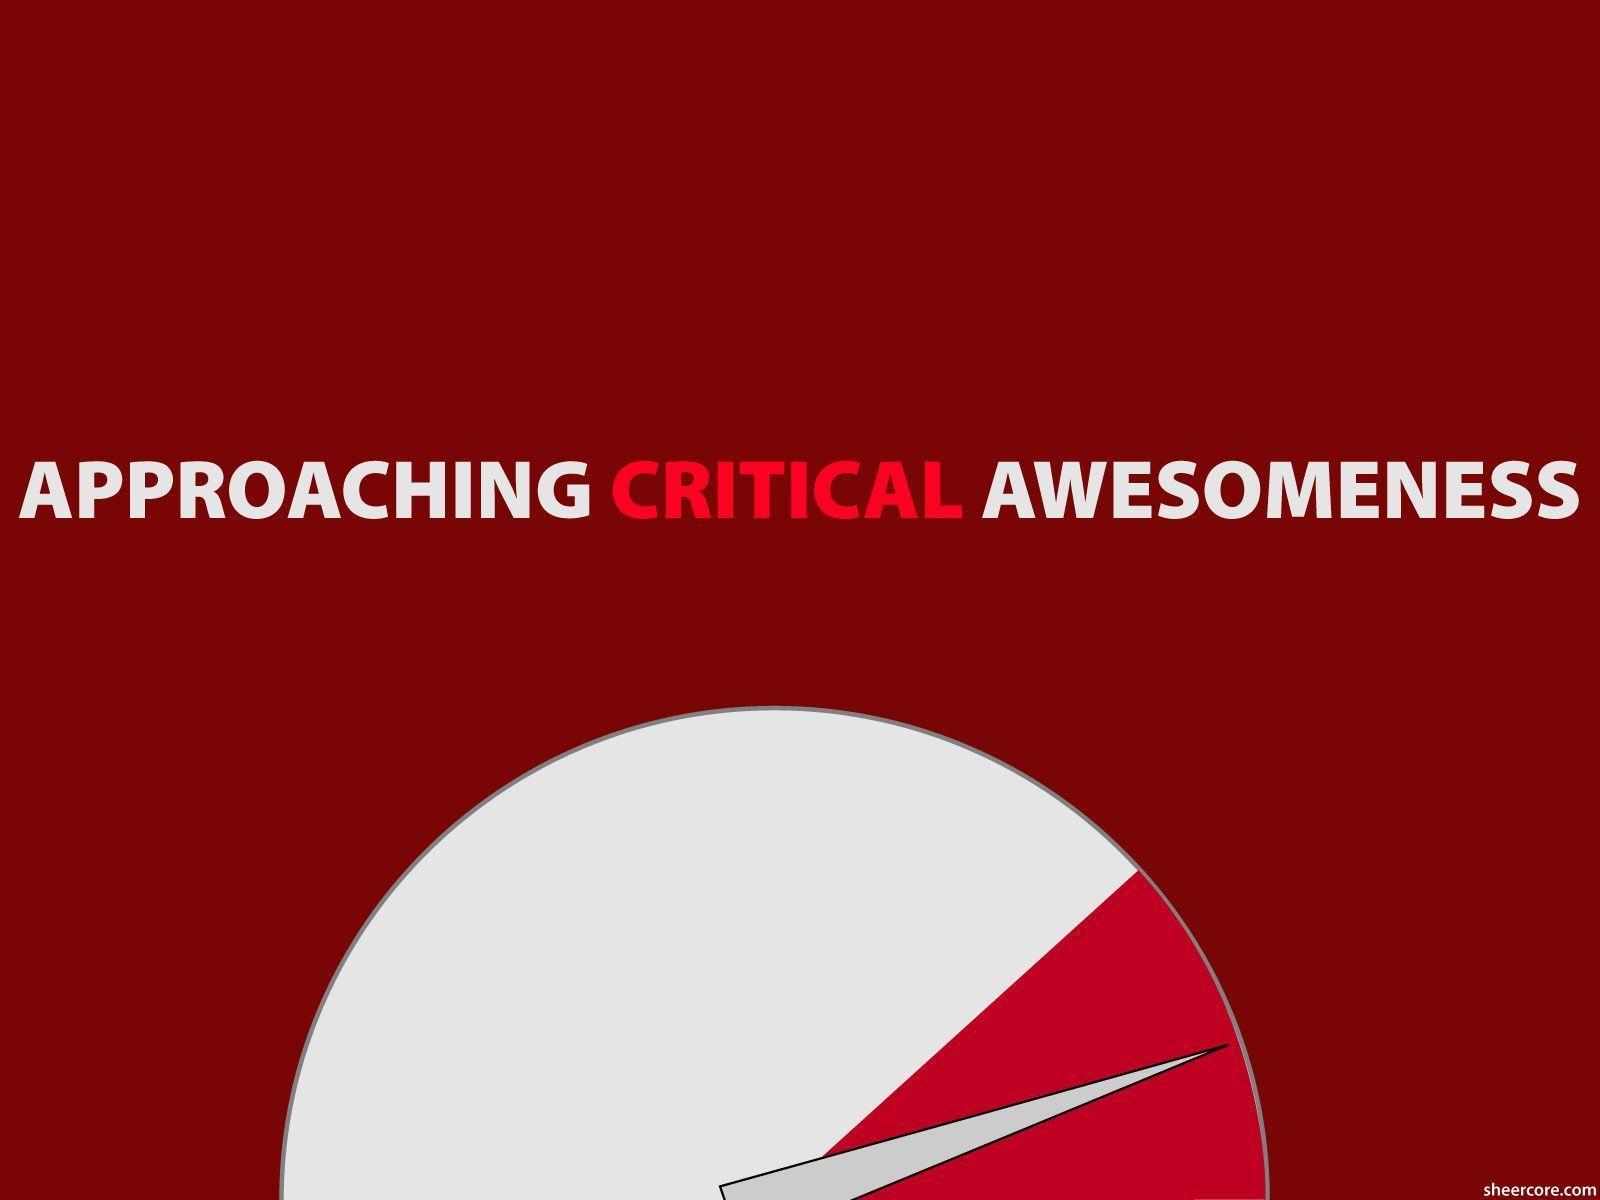 Download Critical Awesomedoes Wallpaper 1600x1200